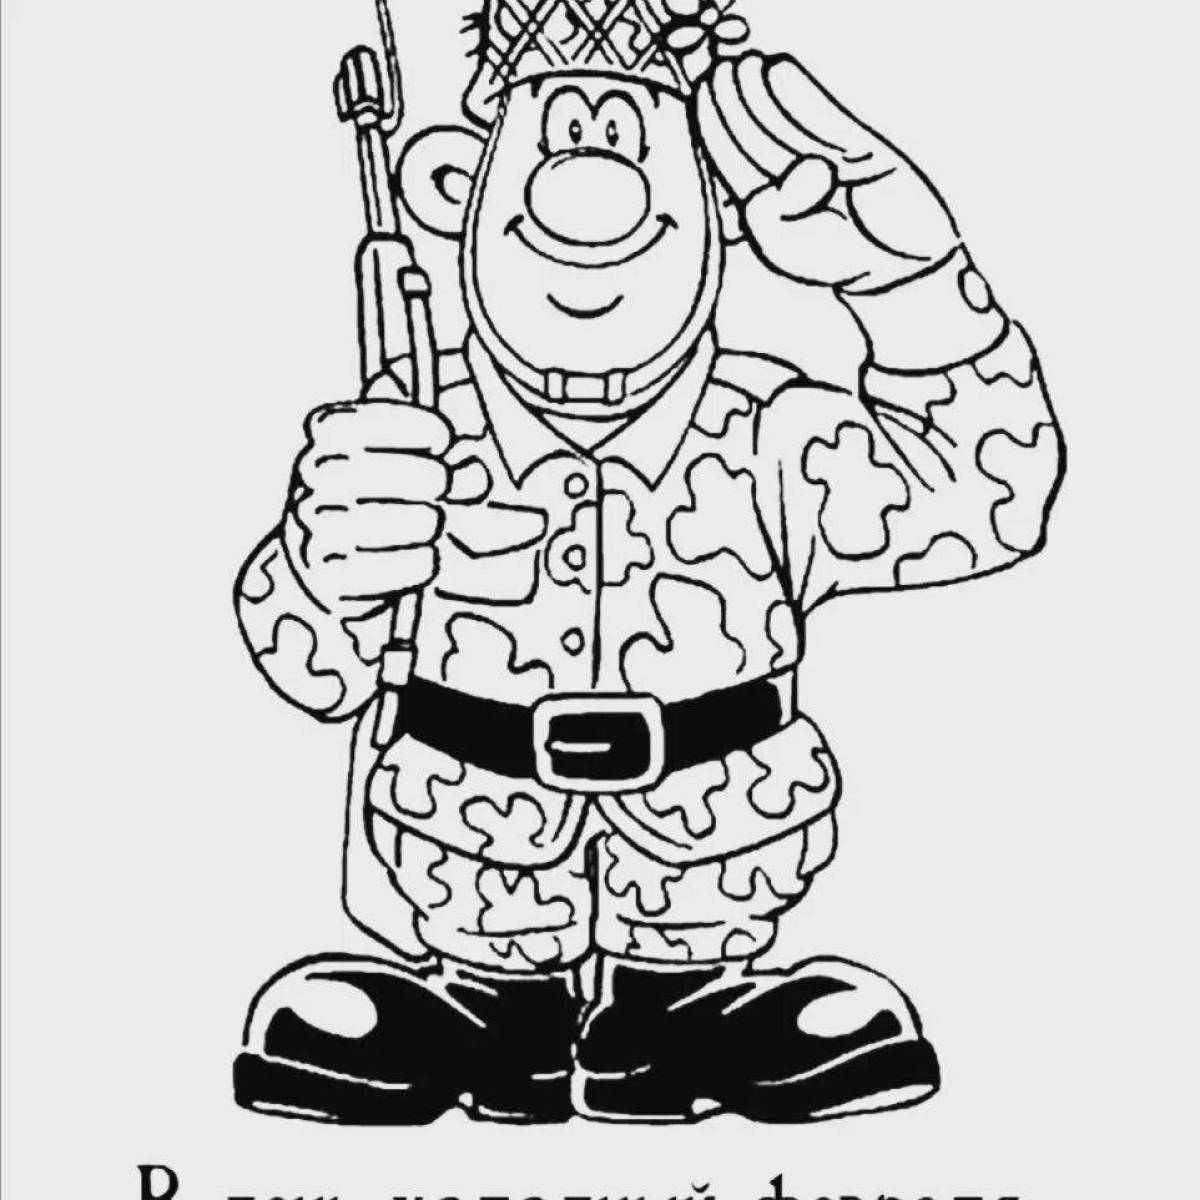 Inspirational soldier hero coloring page